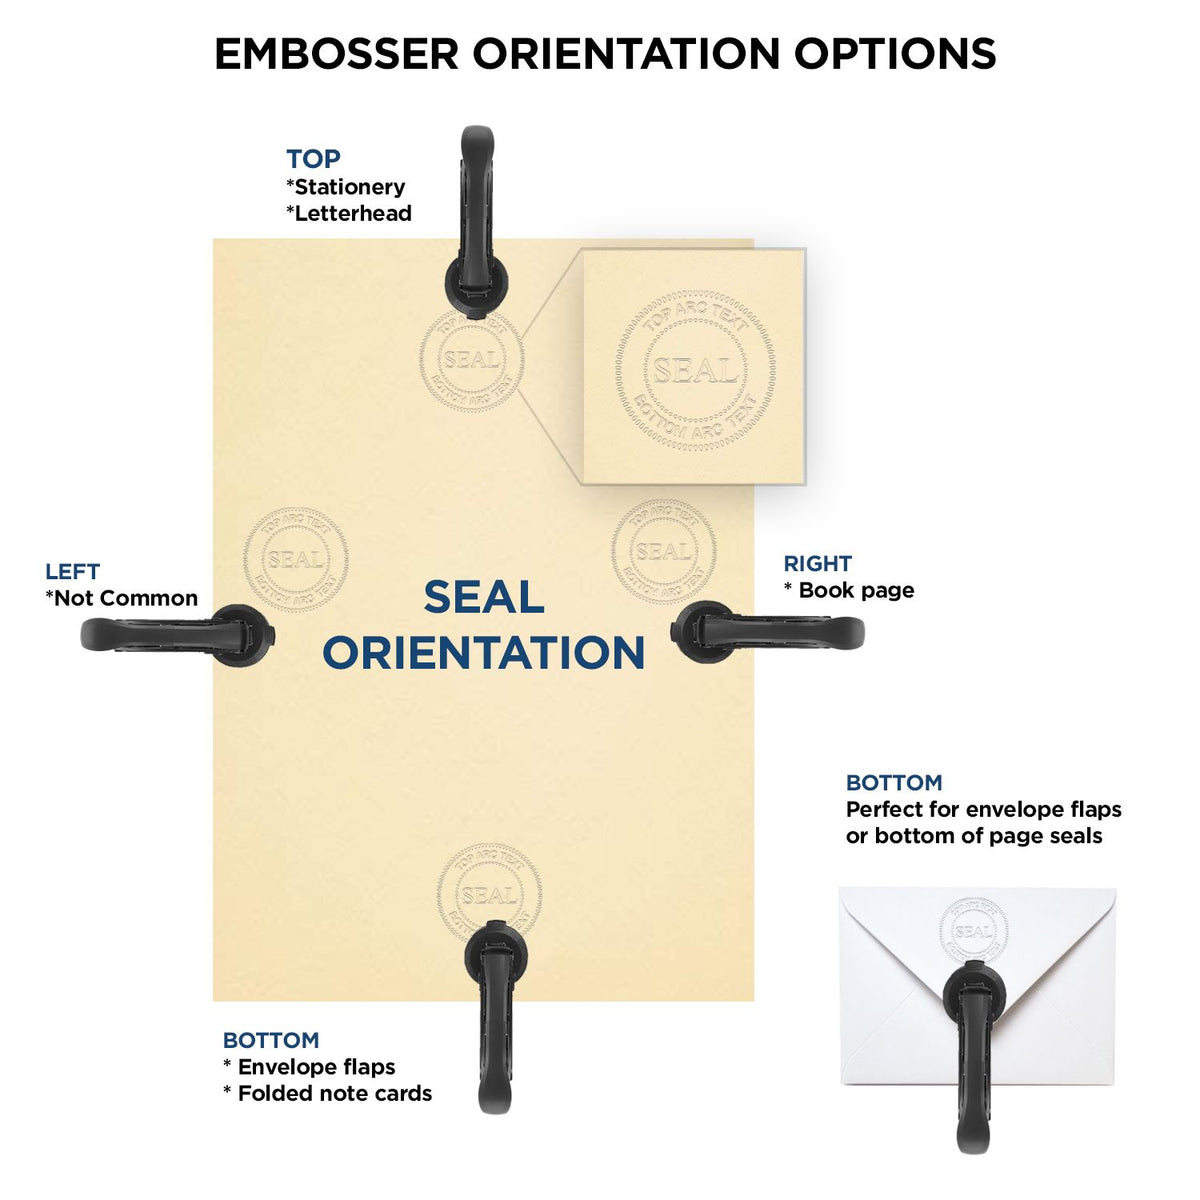 An infographic for the Handheld Delaware Architect Seal Embosser showing embosser orientation, this is showing examples of a top, bottom, right and left insert.